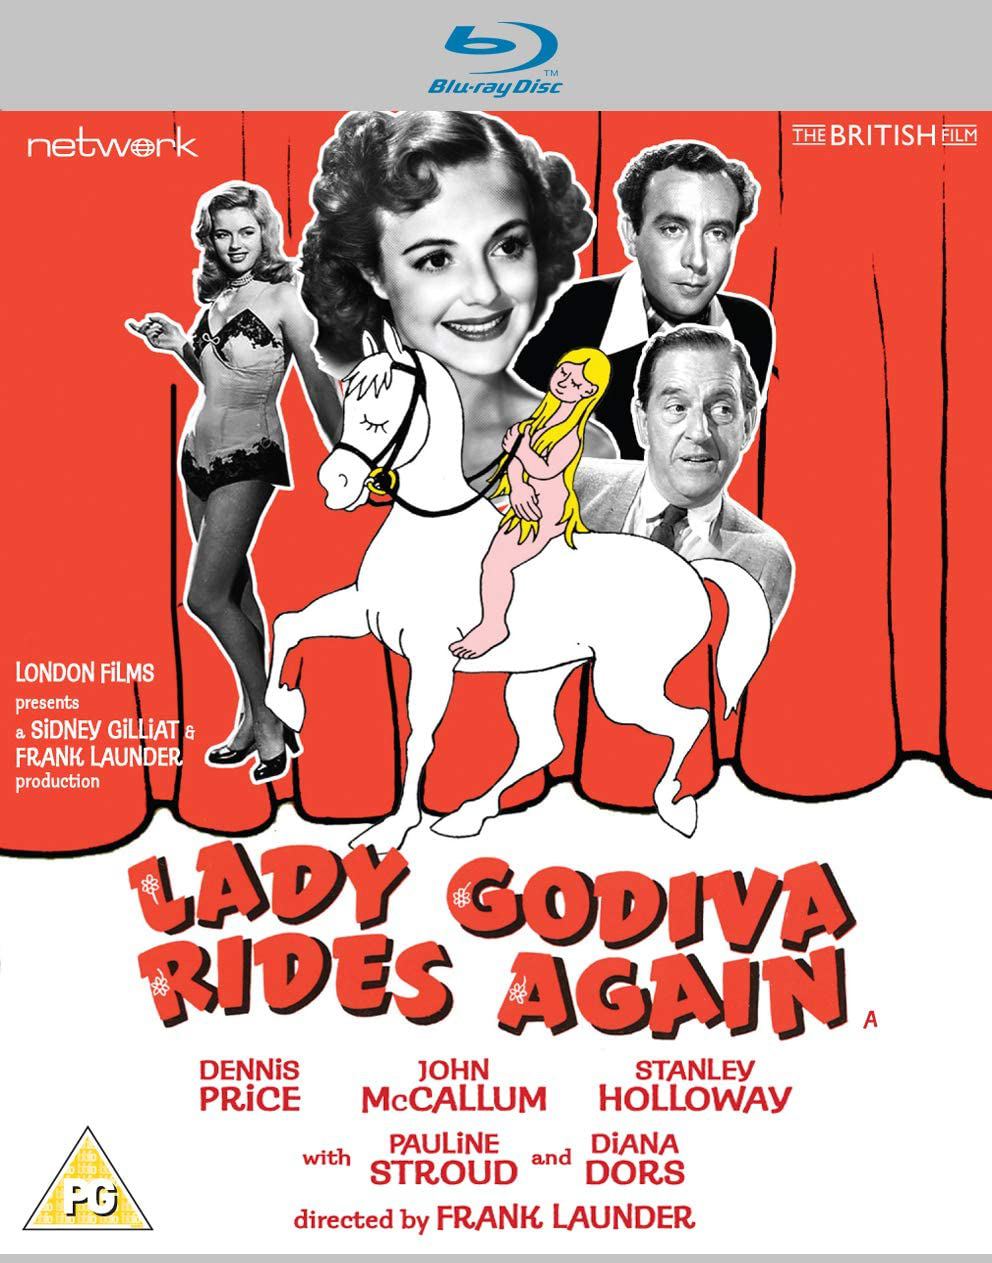 Lady Godiva Rides Again (1951) Blu-ray from Network and The British Film (2020)